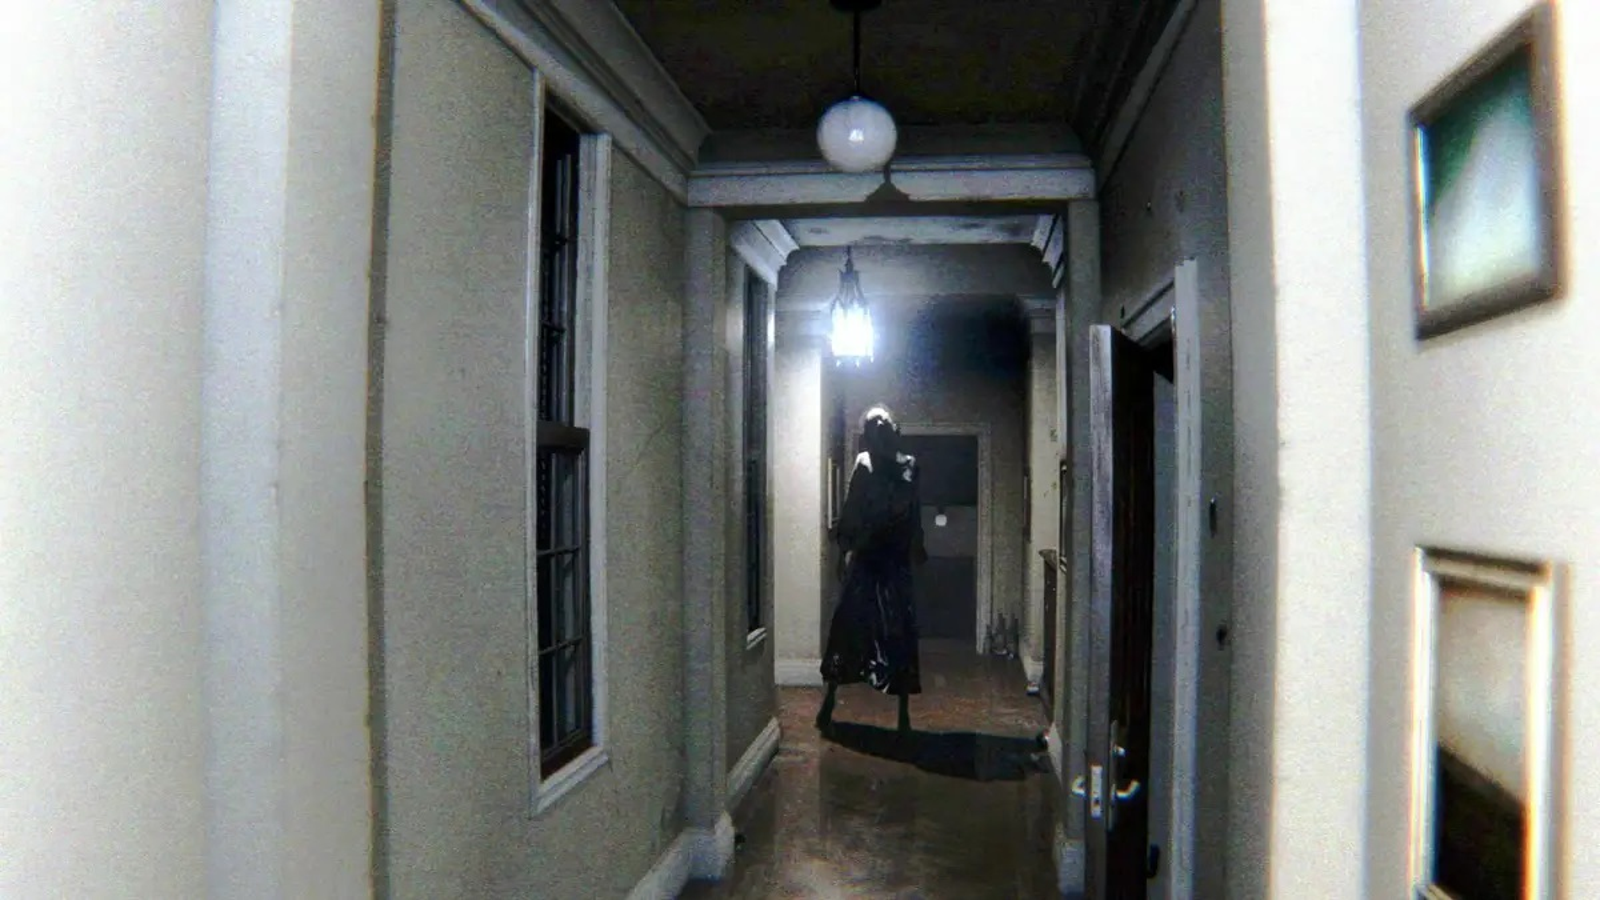 P.T.' The 'Silent Hill' Demo Changed Video Games Seven Years Ago